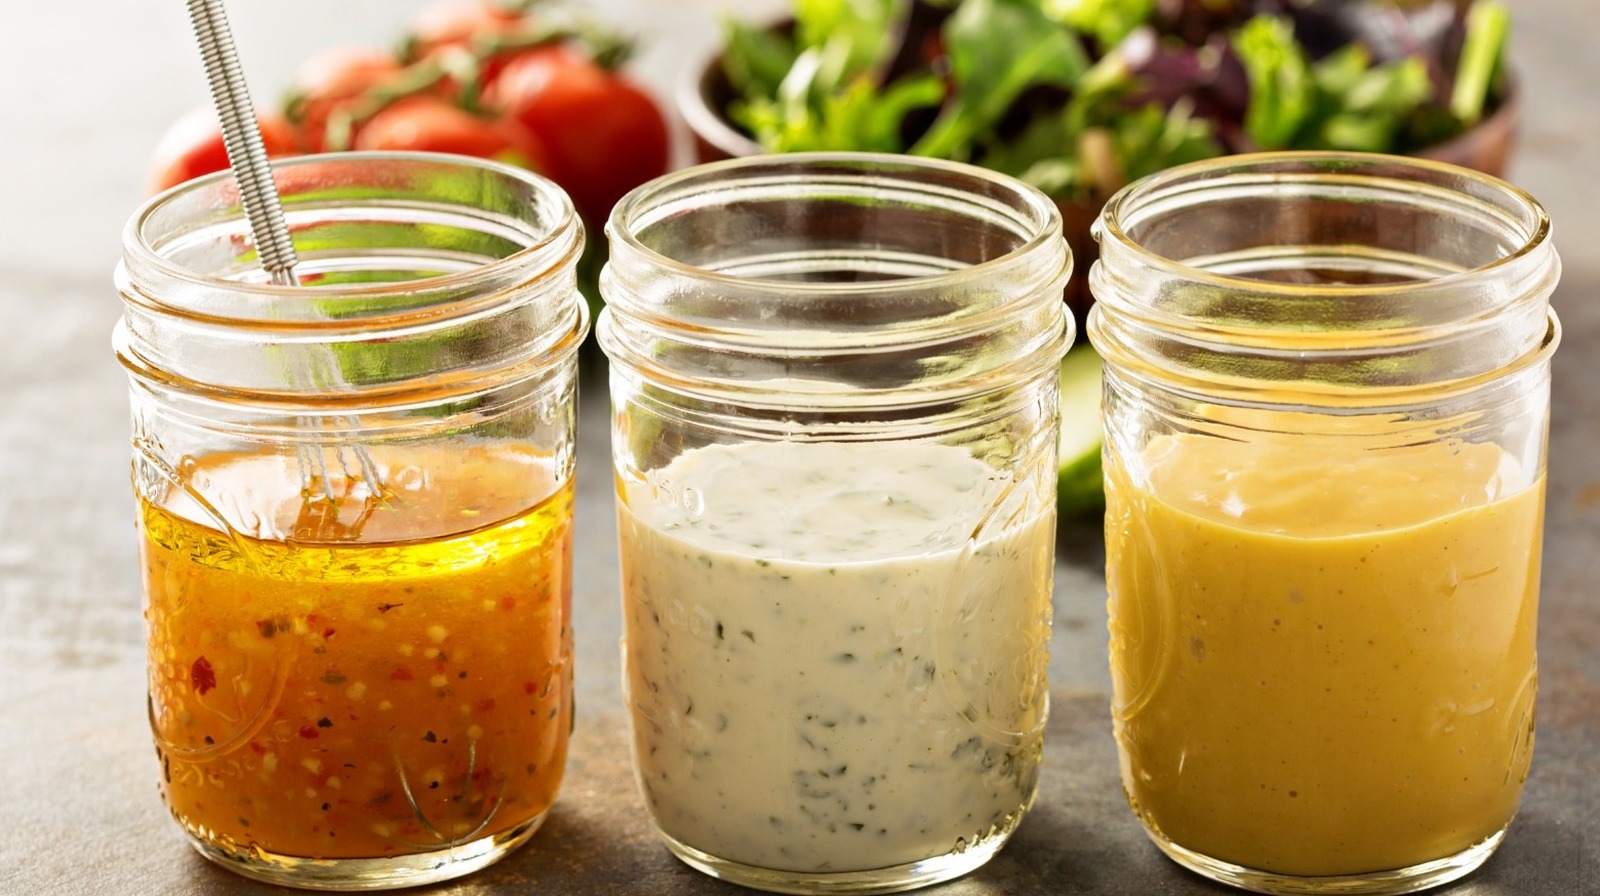 12 Types Of Salad Dressings And When You Should Use Them